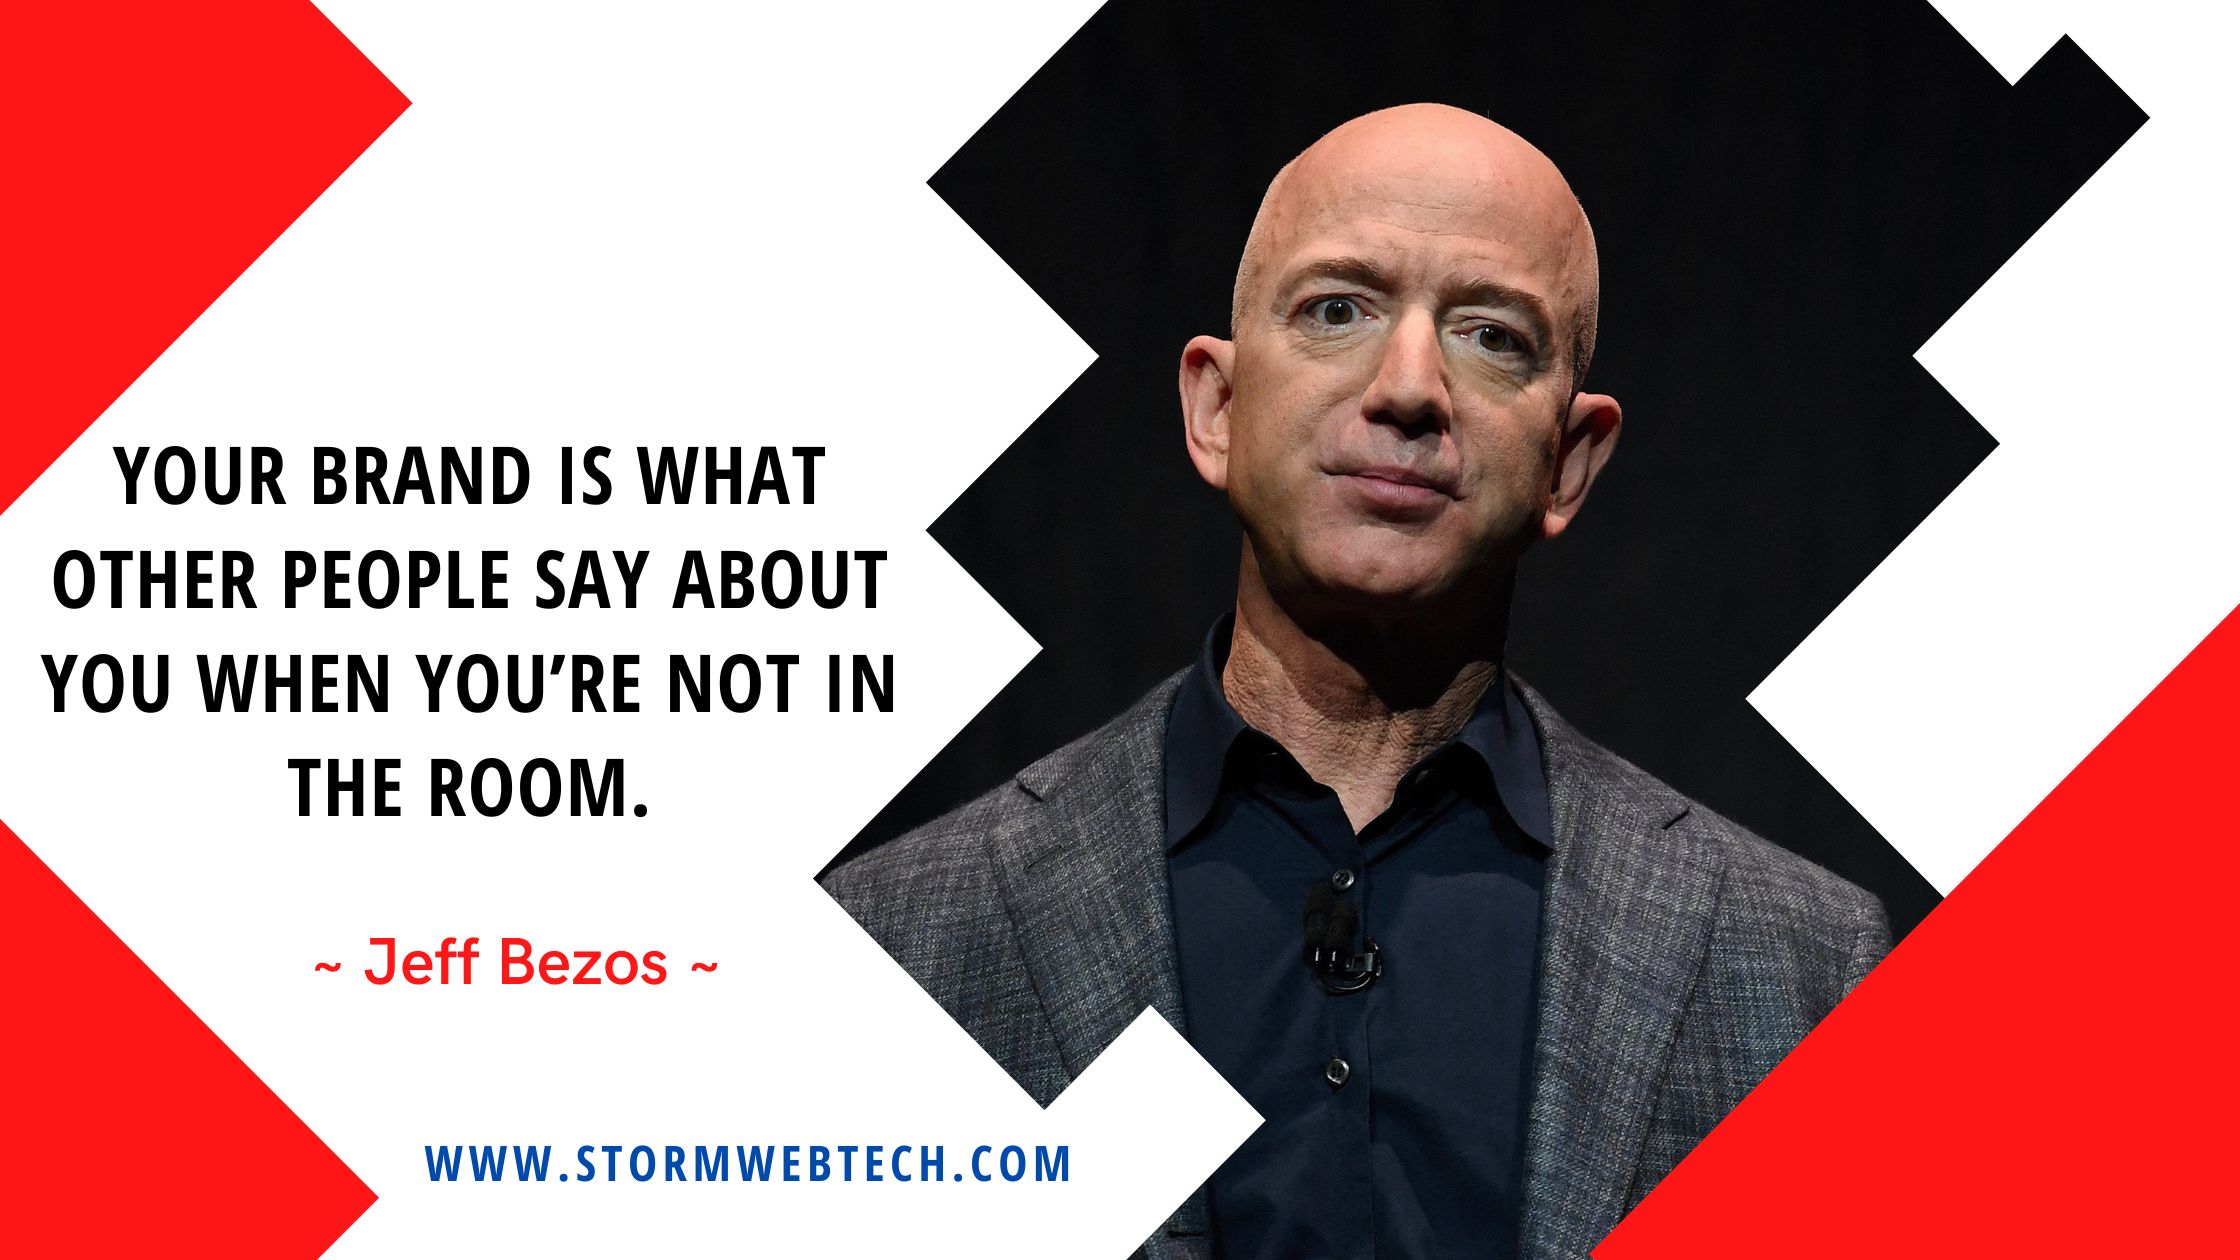 famous jeff bezos quotes about success, jeff bezos quotes in english, motivational quotes of jeff bezos in english, jeff bezos motivational quotes